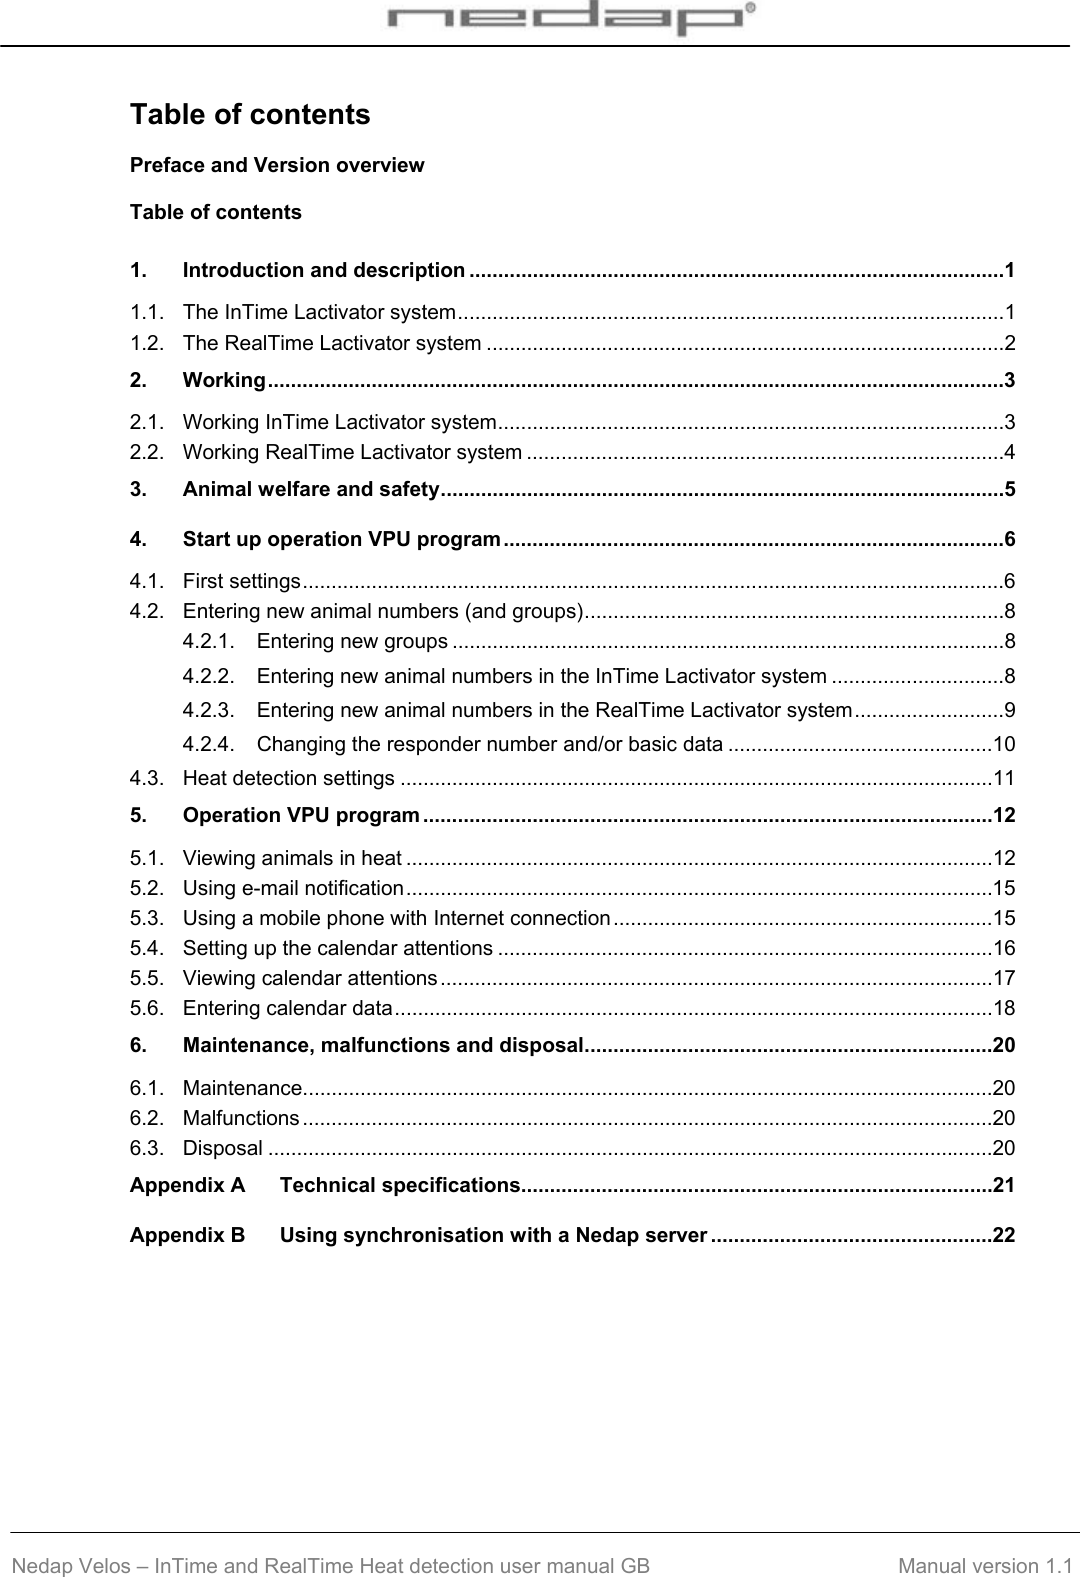  Nedap Velos – InTime and RealTime Heat detection user manual GB                                        Manual version 1.1 Table of contents Preface and Version overview Table of contents 1. Introduction and description .............................................................................................1 1.1. The InTime Lactivator system...............................................................................................1 1.2. The RealTime Lactivator system ..........................................................................................2 2. Working................................................................................................................................3 2.1. Working InTime Lactivator system........................................................................................3 2.2. Working RealTime Lactivator system ...................................................................................4 3. Animal welfare and safety..................................................................................................5 4. Start up operation VPU program.......................................................................................6 4.1. First settings..........................................................................................................................6 4.2. Entering new animal numbers (and groups).........................................................................8 4.2.1. Entering new groups ................................................................................................8 4.2.2. Entering new animal numbers in the InTime Lactivator system ..............................8 4.2.3. Entering new animal numbers in the RealTime Lactivator system..........................9 4.2.4. Changing the responder number and/or basic data ..............................................10 4.3. Heat detection settings .......................................................................................................11 5. Operation VPU program ...................................................................................................12 5.1. Viewing animals in heat ......................................................................................................12 5.2. Using e-mail notification......................................................................................................15 5.3. Using a mobile phone with Internet connection..................................................................15 5.4. Setting up the calendar attentions ......................................................................................16 5.5. Viewing calendar attentions................................................................................................17 5.6. Entering calendar data........................................................................................................18 6. Maintenance, malfunctions and disposal.......................................................................20 6.1. Maintenance........................................................................................................................20 6.2. Malfunctions ........................................................................................................................20 6.3. Disposal ..............................................................................................................................20 Appendix A Technical specifications..................................................................................21 Appendix B Using synchronisation with a Nedap server .................................................22  